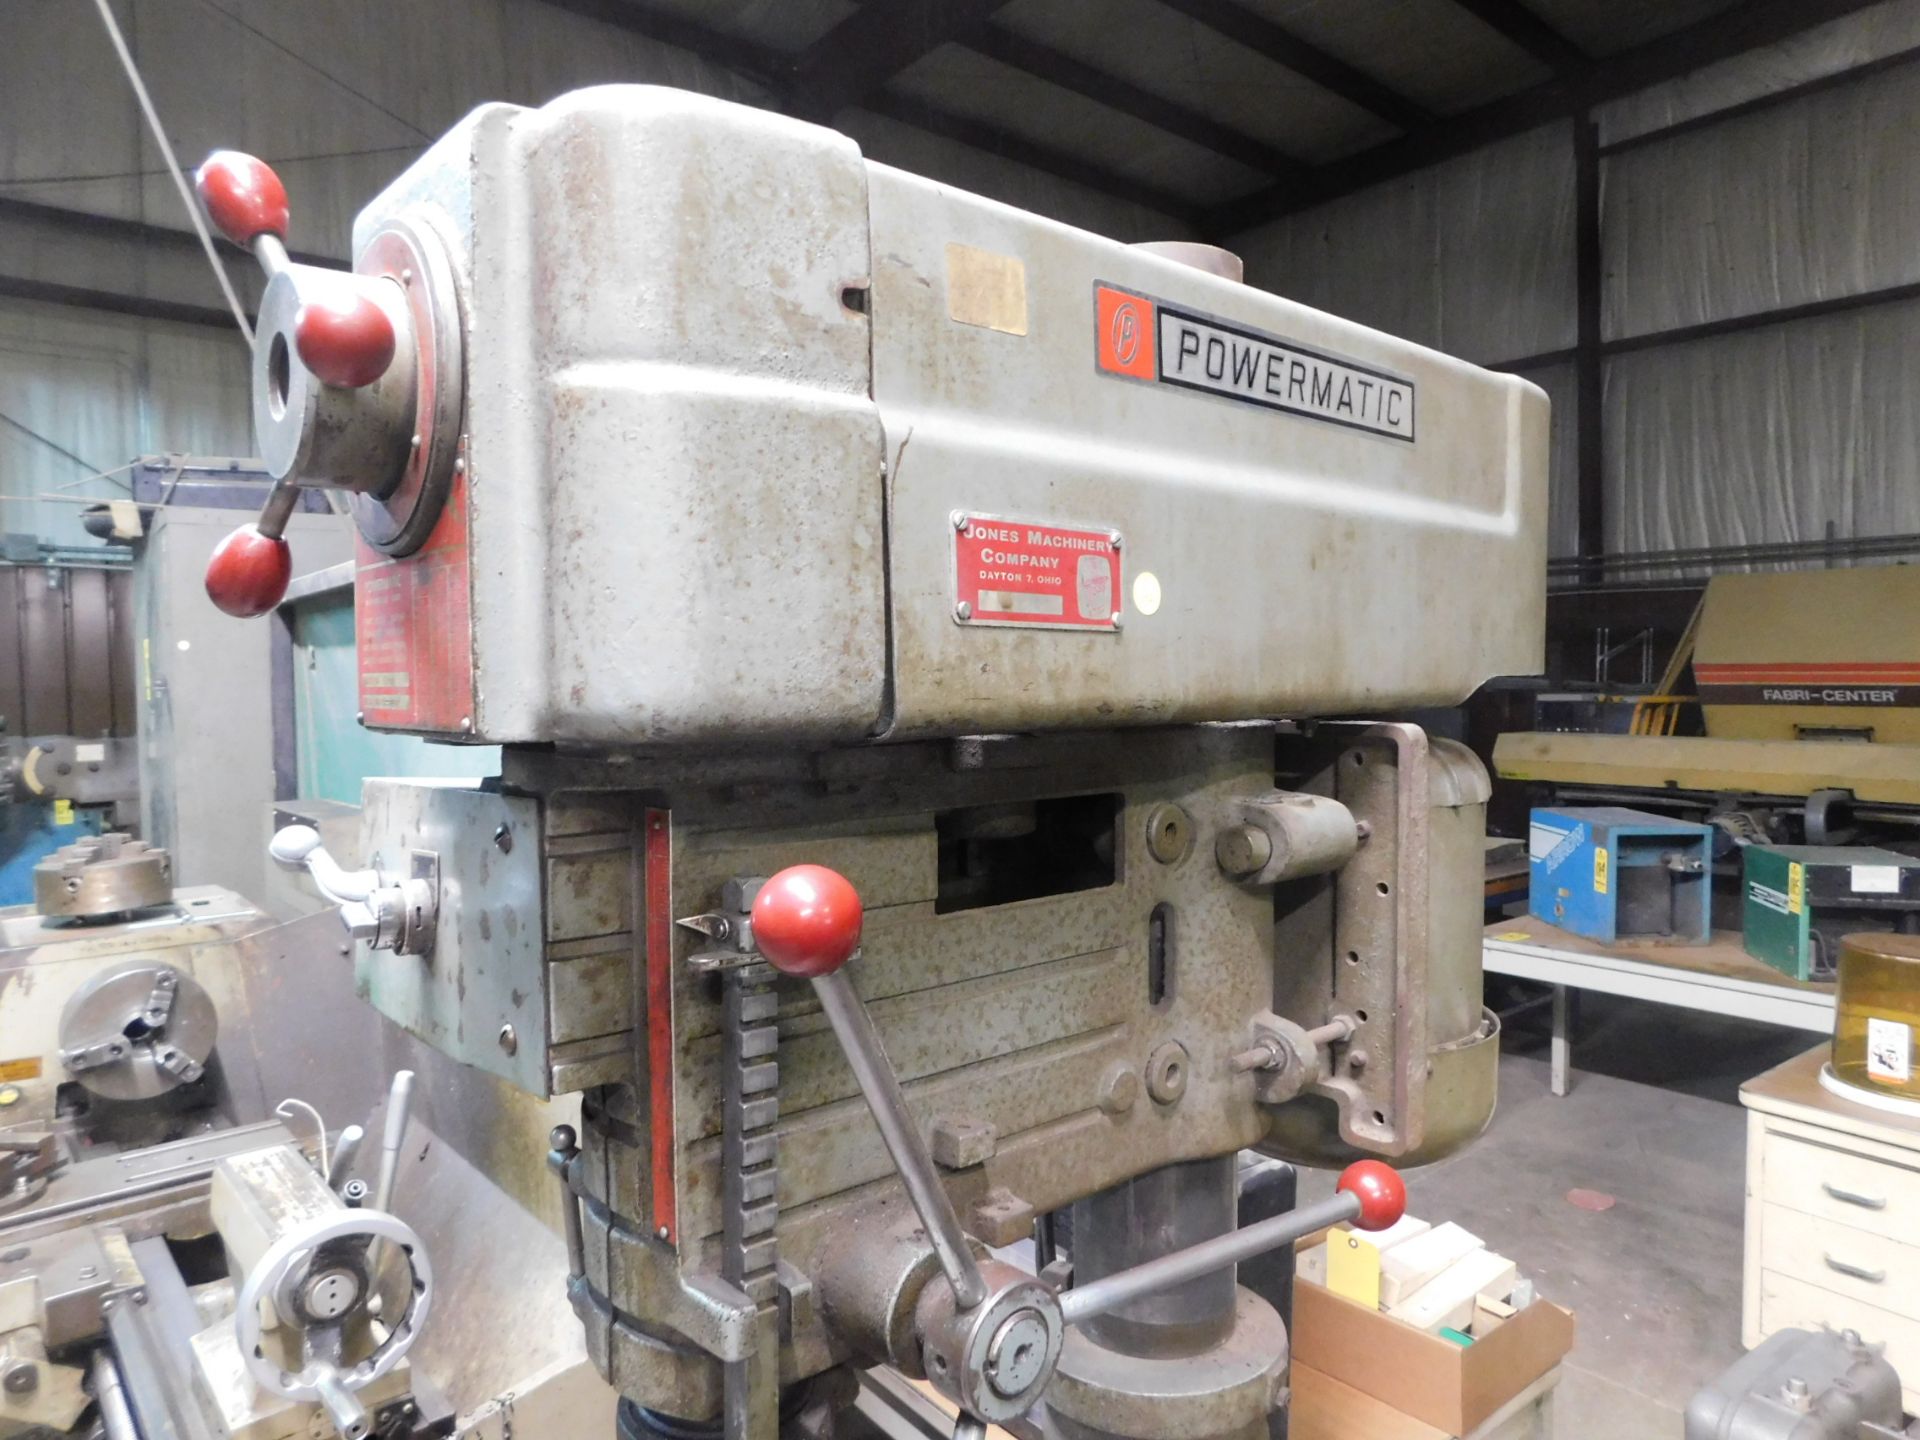 Powermatic Model 1200, 20" Variable Speed Drill Press, 1 1/2 HP, 24" X 40" Table, Loading Fee $100 - Image 5 of 6